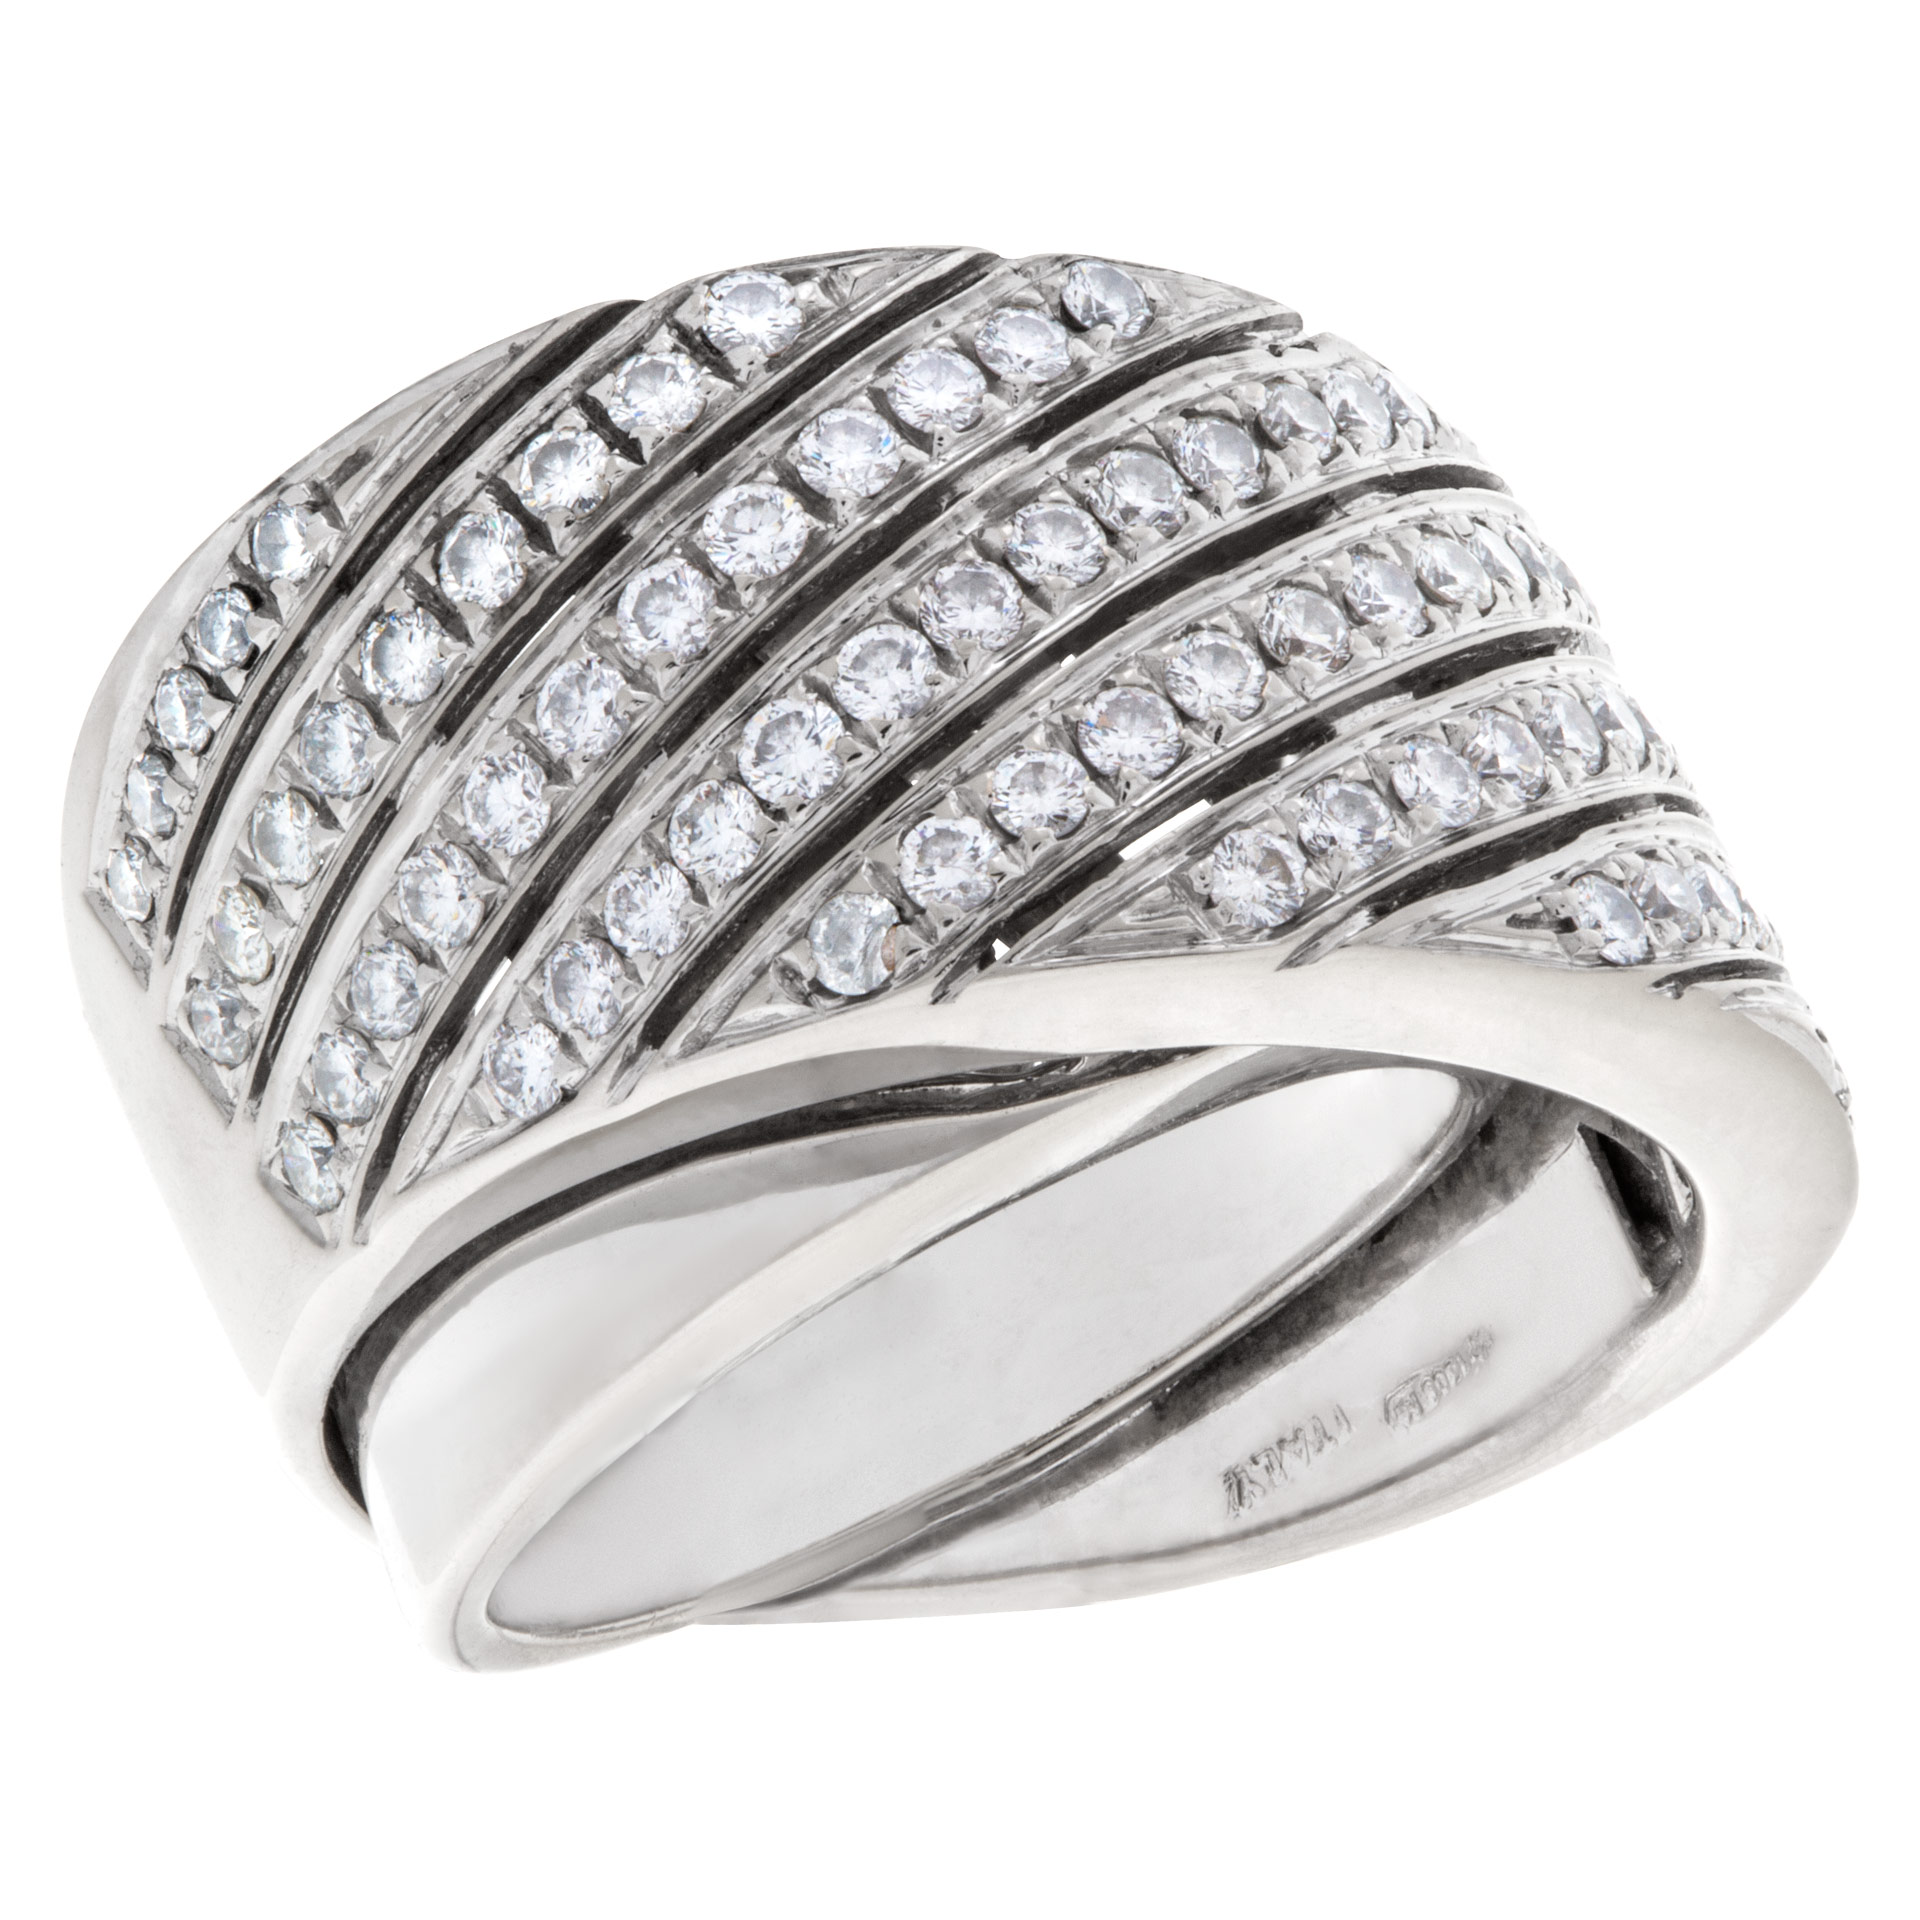 Contemporary design wide "crisscross" ring with 1.50 carat pave diamonds set in 18K white gold. image 5